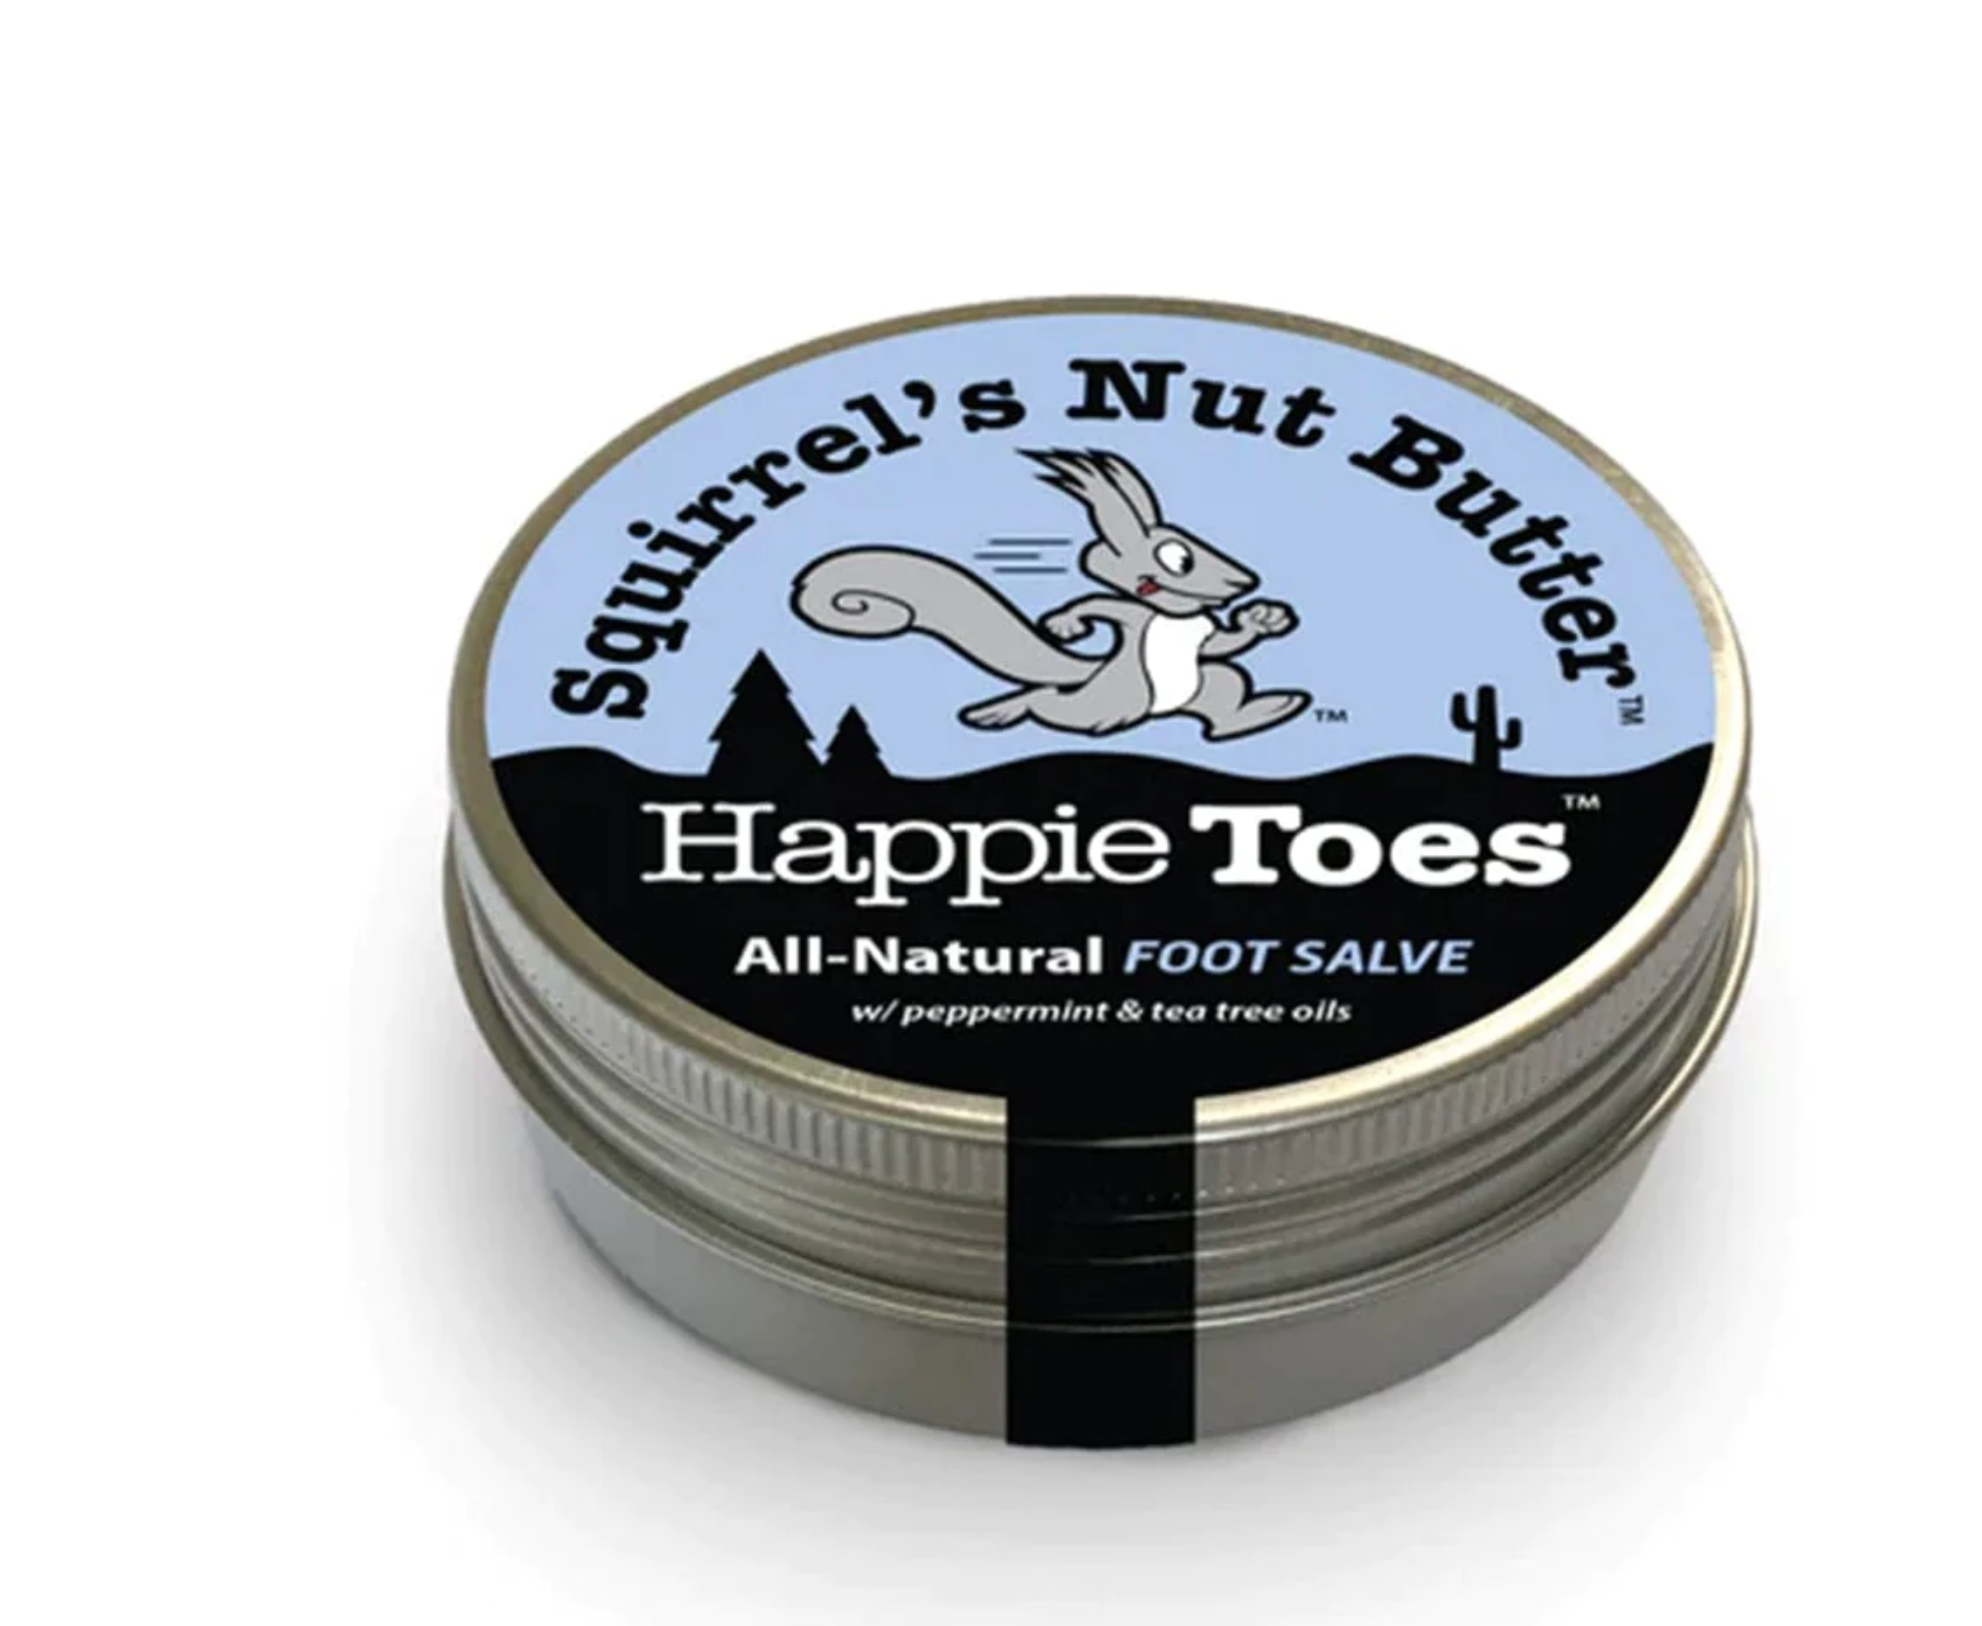 Squirrel's Nut Butter - Happie Toes 2oz Tin